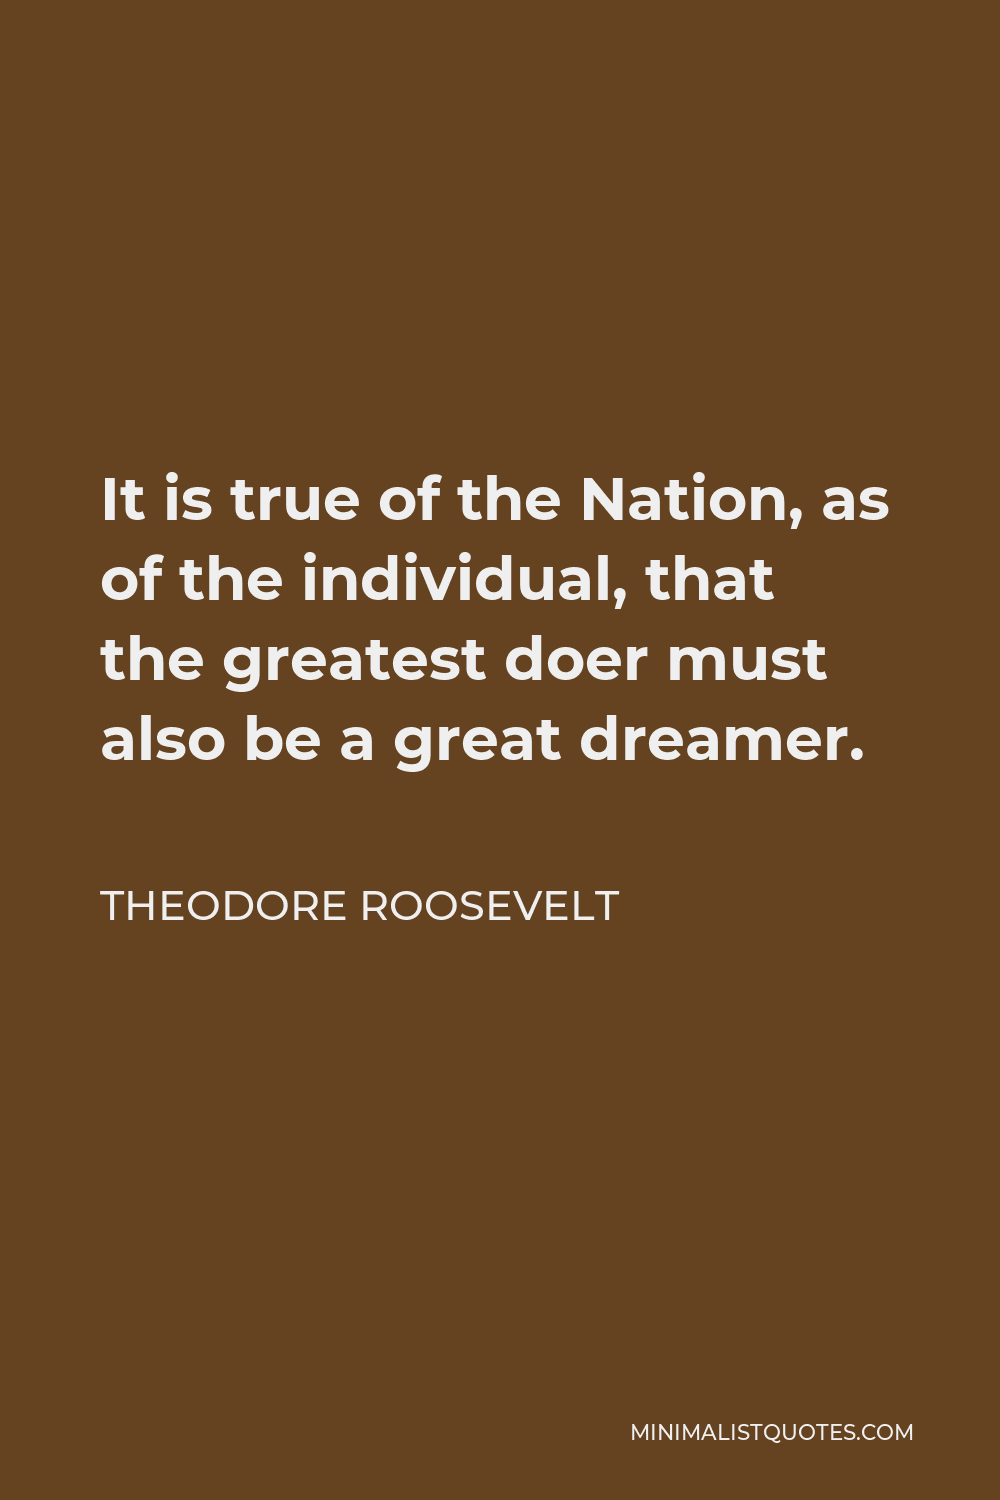 Theodore Roosevelt Quote - It is true of the Nation, as of the individual, that the greatest doer must also be a great dreamer.